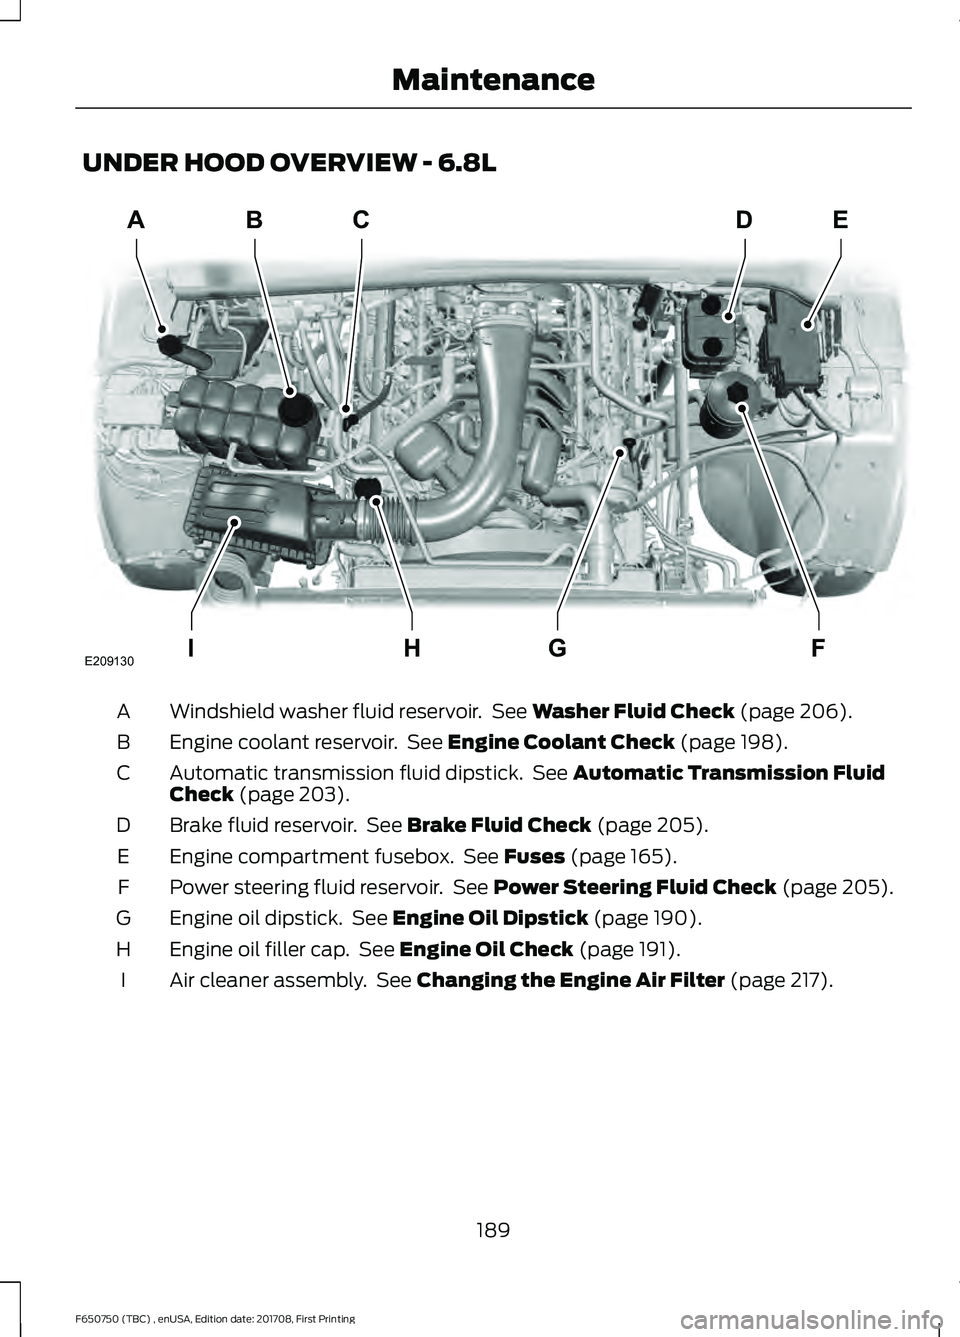 FORD F-650/750 2018  Owners Manual UNDER HOOD OVERVIEW - 6.8L
Windshield washer fluid reservoir.  See Washer Fluid Check (page 206).
A
Engine coolant reservoir.  See 
Engine Coolant Check (page 198).
B
Automatic transmission fluid dips